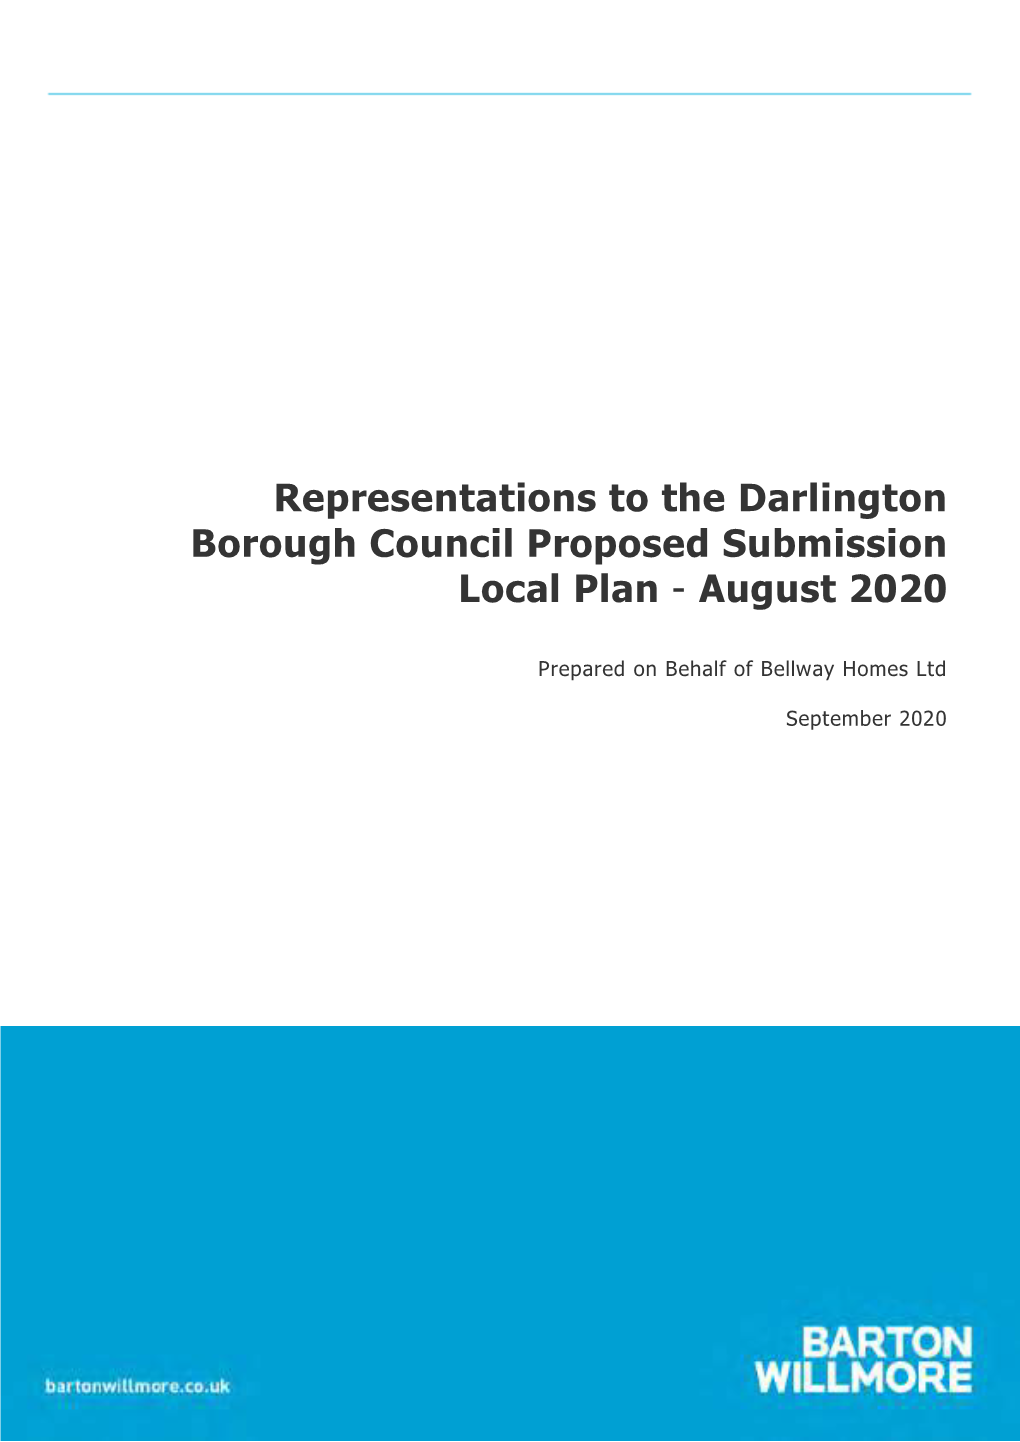 Representations to the Darlington Borough Council Proposed Submission Local Plan - August 2020